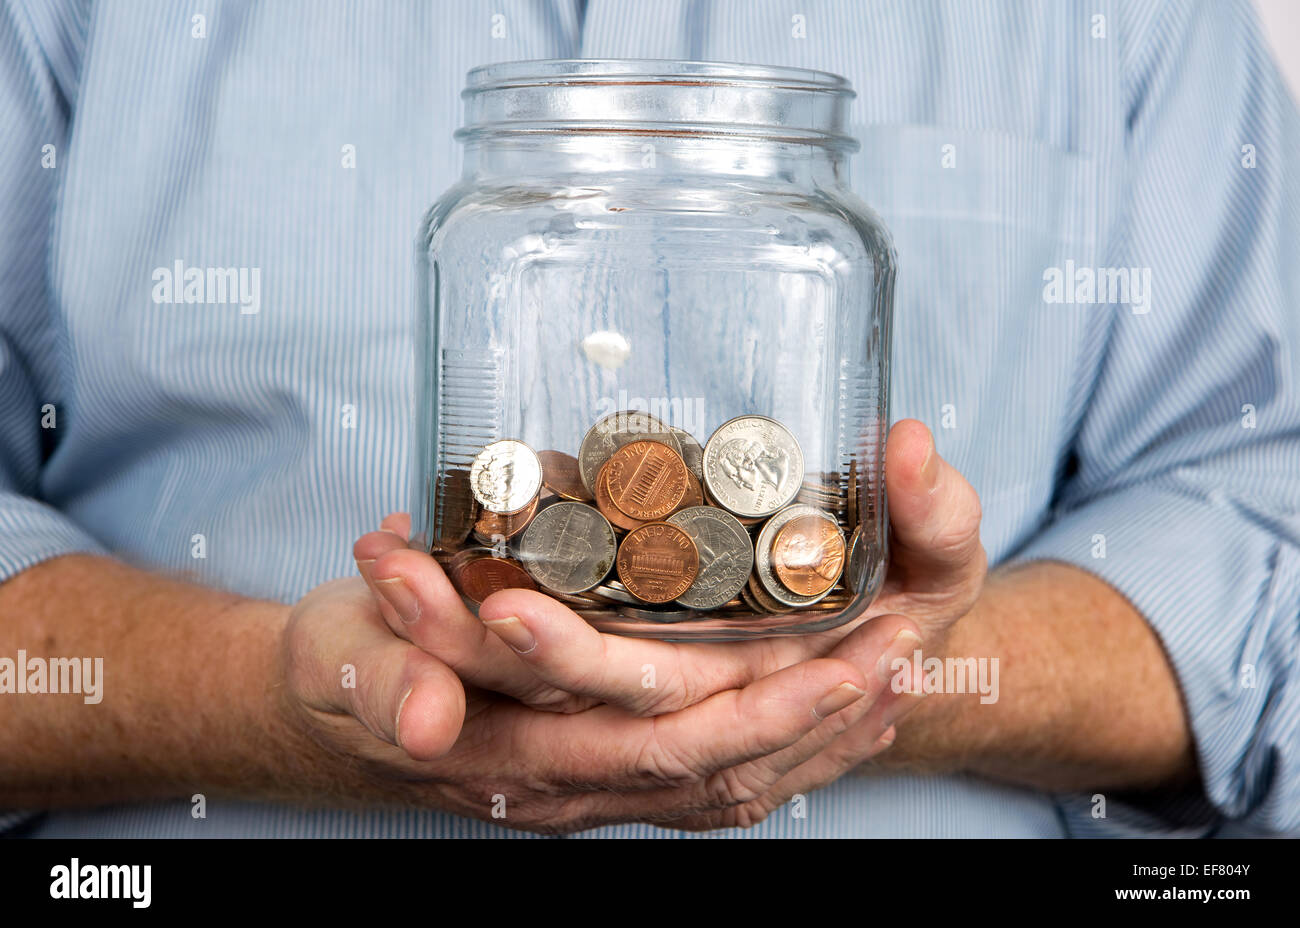 Man holds a glass jar containing United States coins and money. Stock Photo